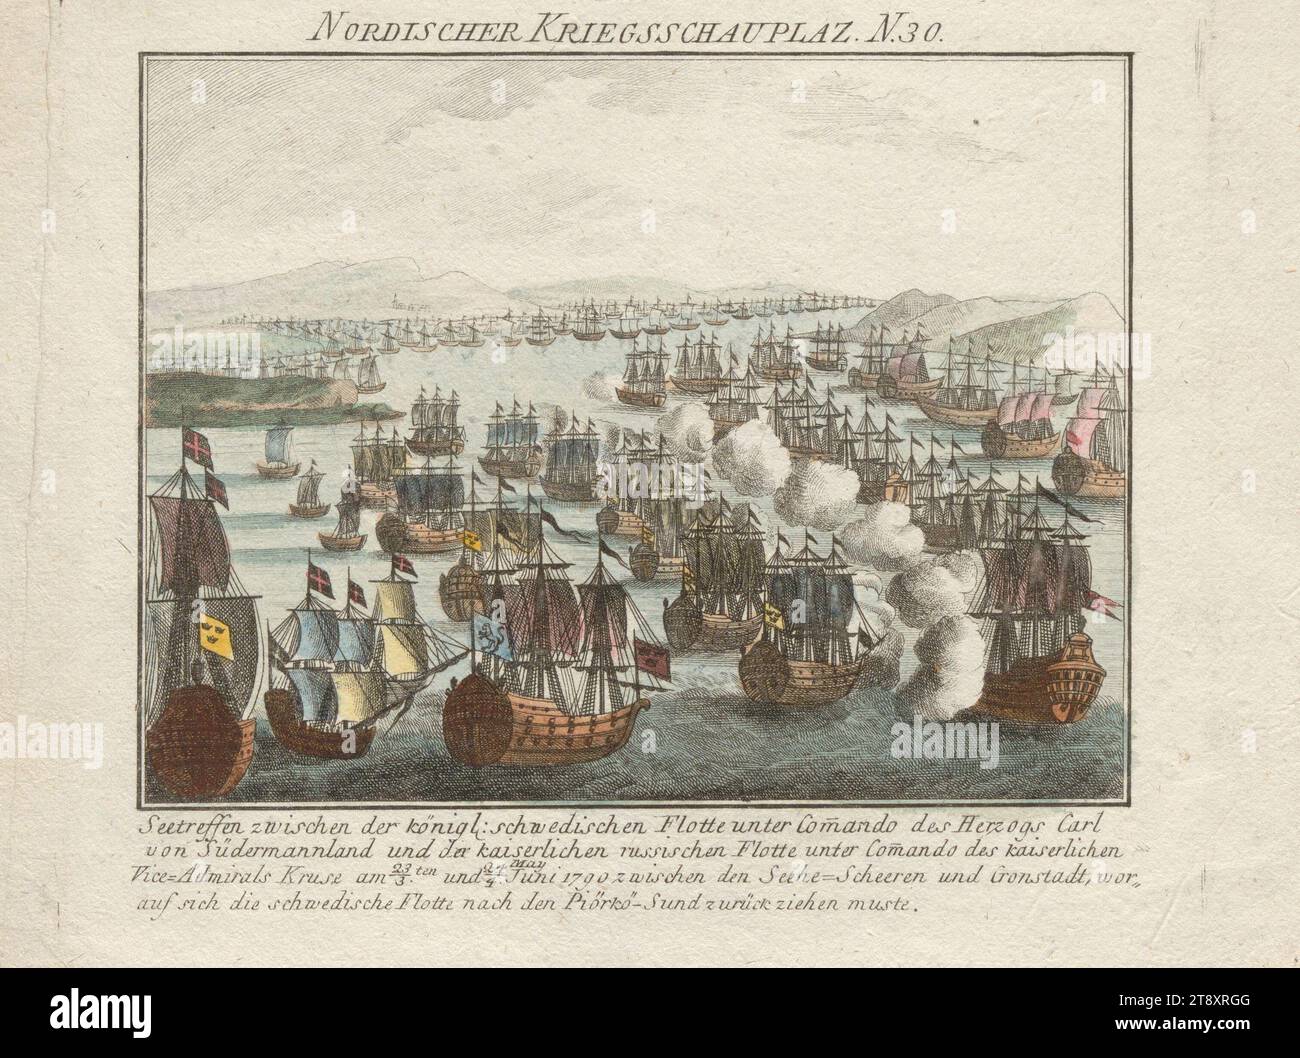 No. 30 of the series 'Nordic Theater of War': sea meeting of the Royal Swedish and the Imperial Russian Fleets on June 3 and 4, 1790, Unknown, 1790, paper, colored, copperplate engraving, height 19 cm, width 24 cm, plate size 17, 1×19, 6 cm, war and warfare, fine arts, military, battle, battle in general, battle (+ naval forces), sailing ship, sailing boat, The Vienna Collection Stock Photo